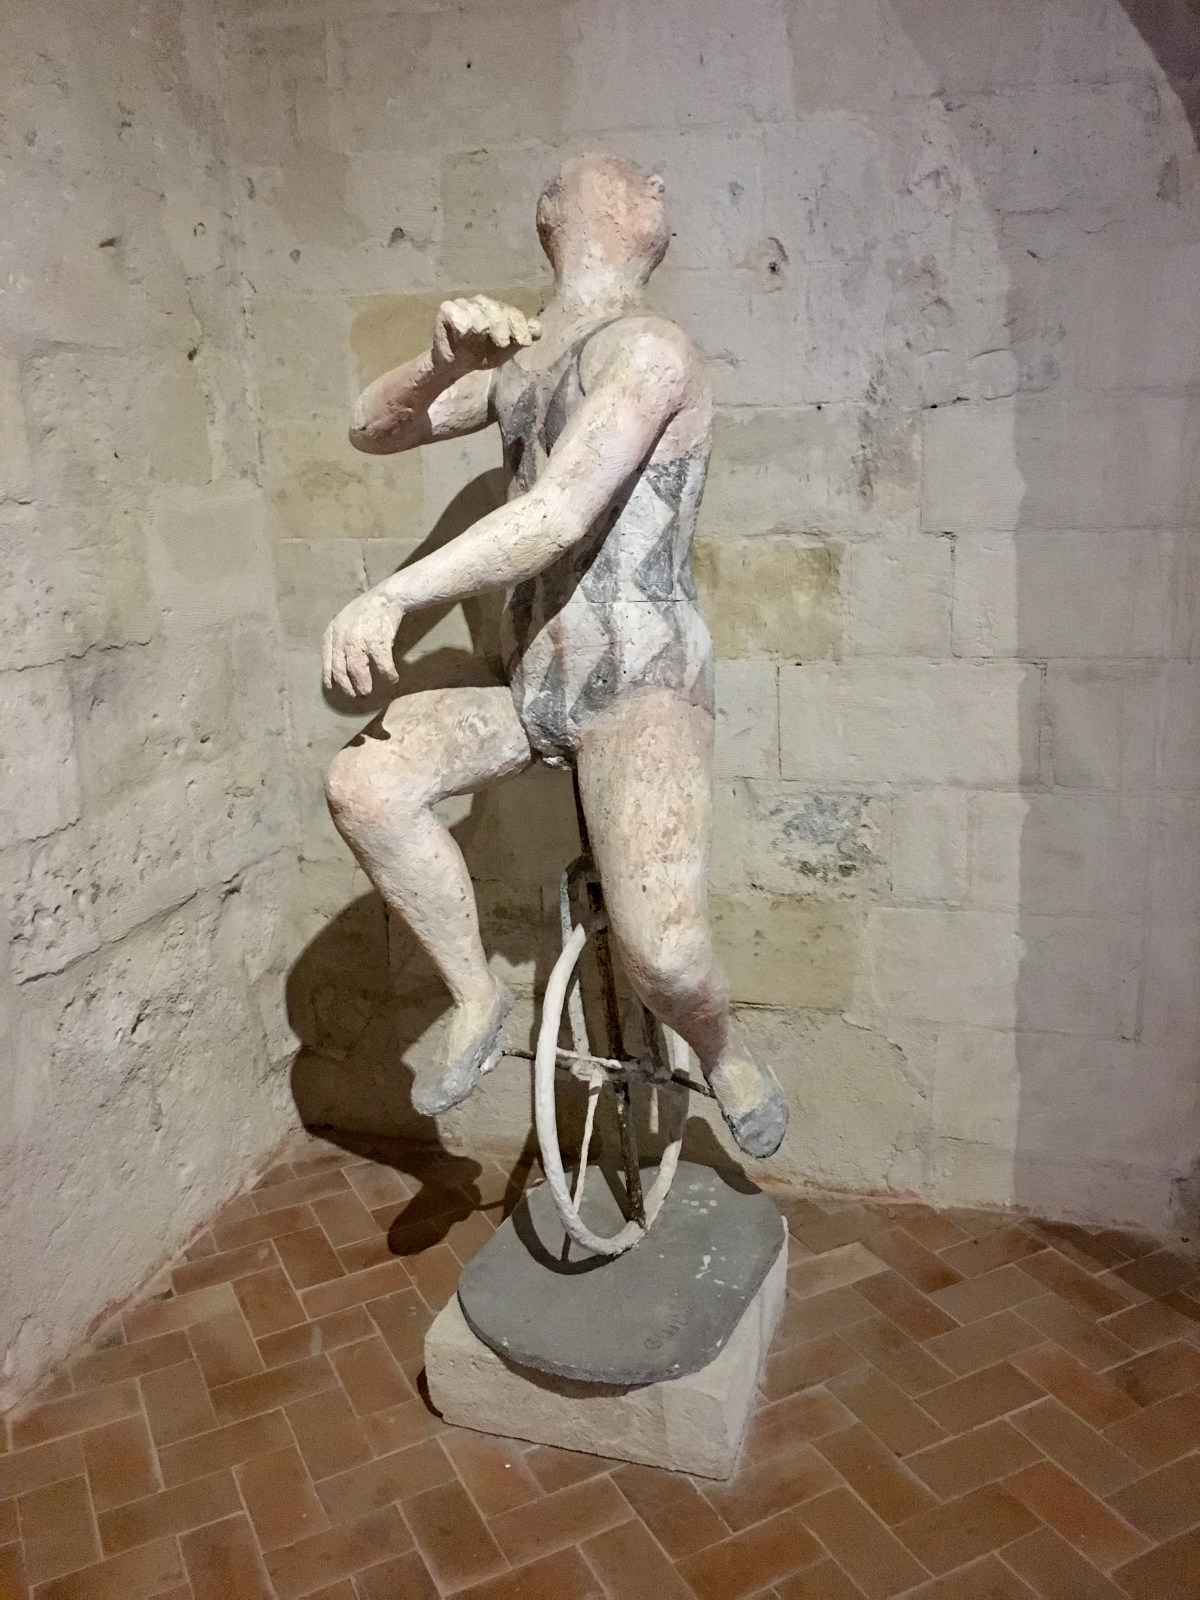 MUSMA, Matera's museum of modern sculpture set in a centuries-old cave.